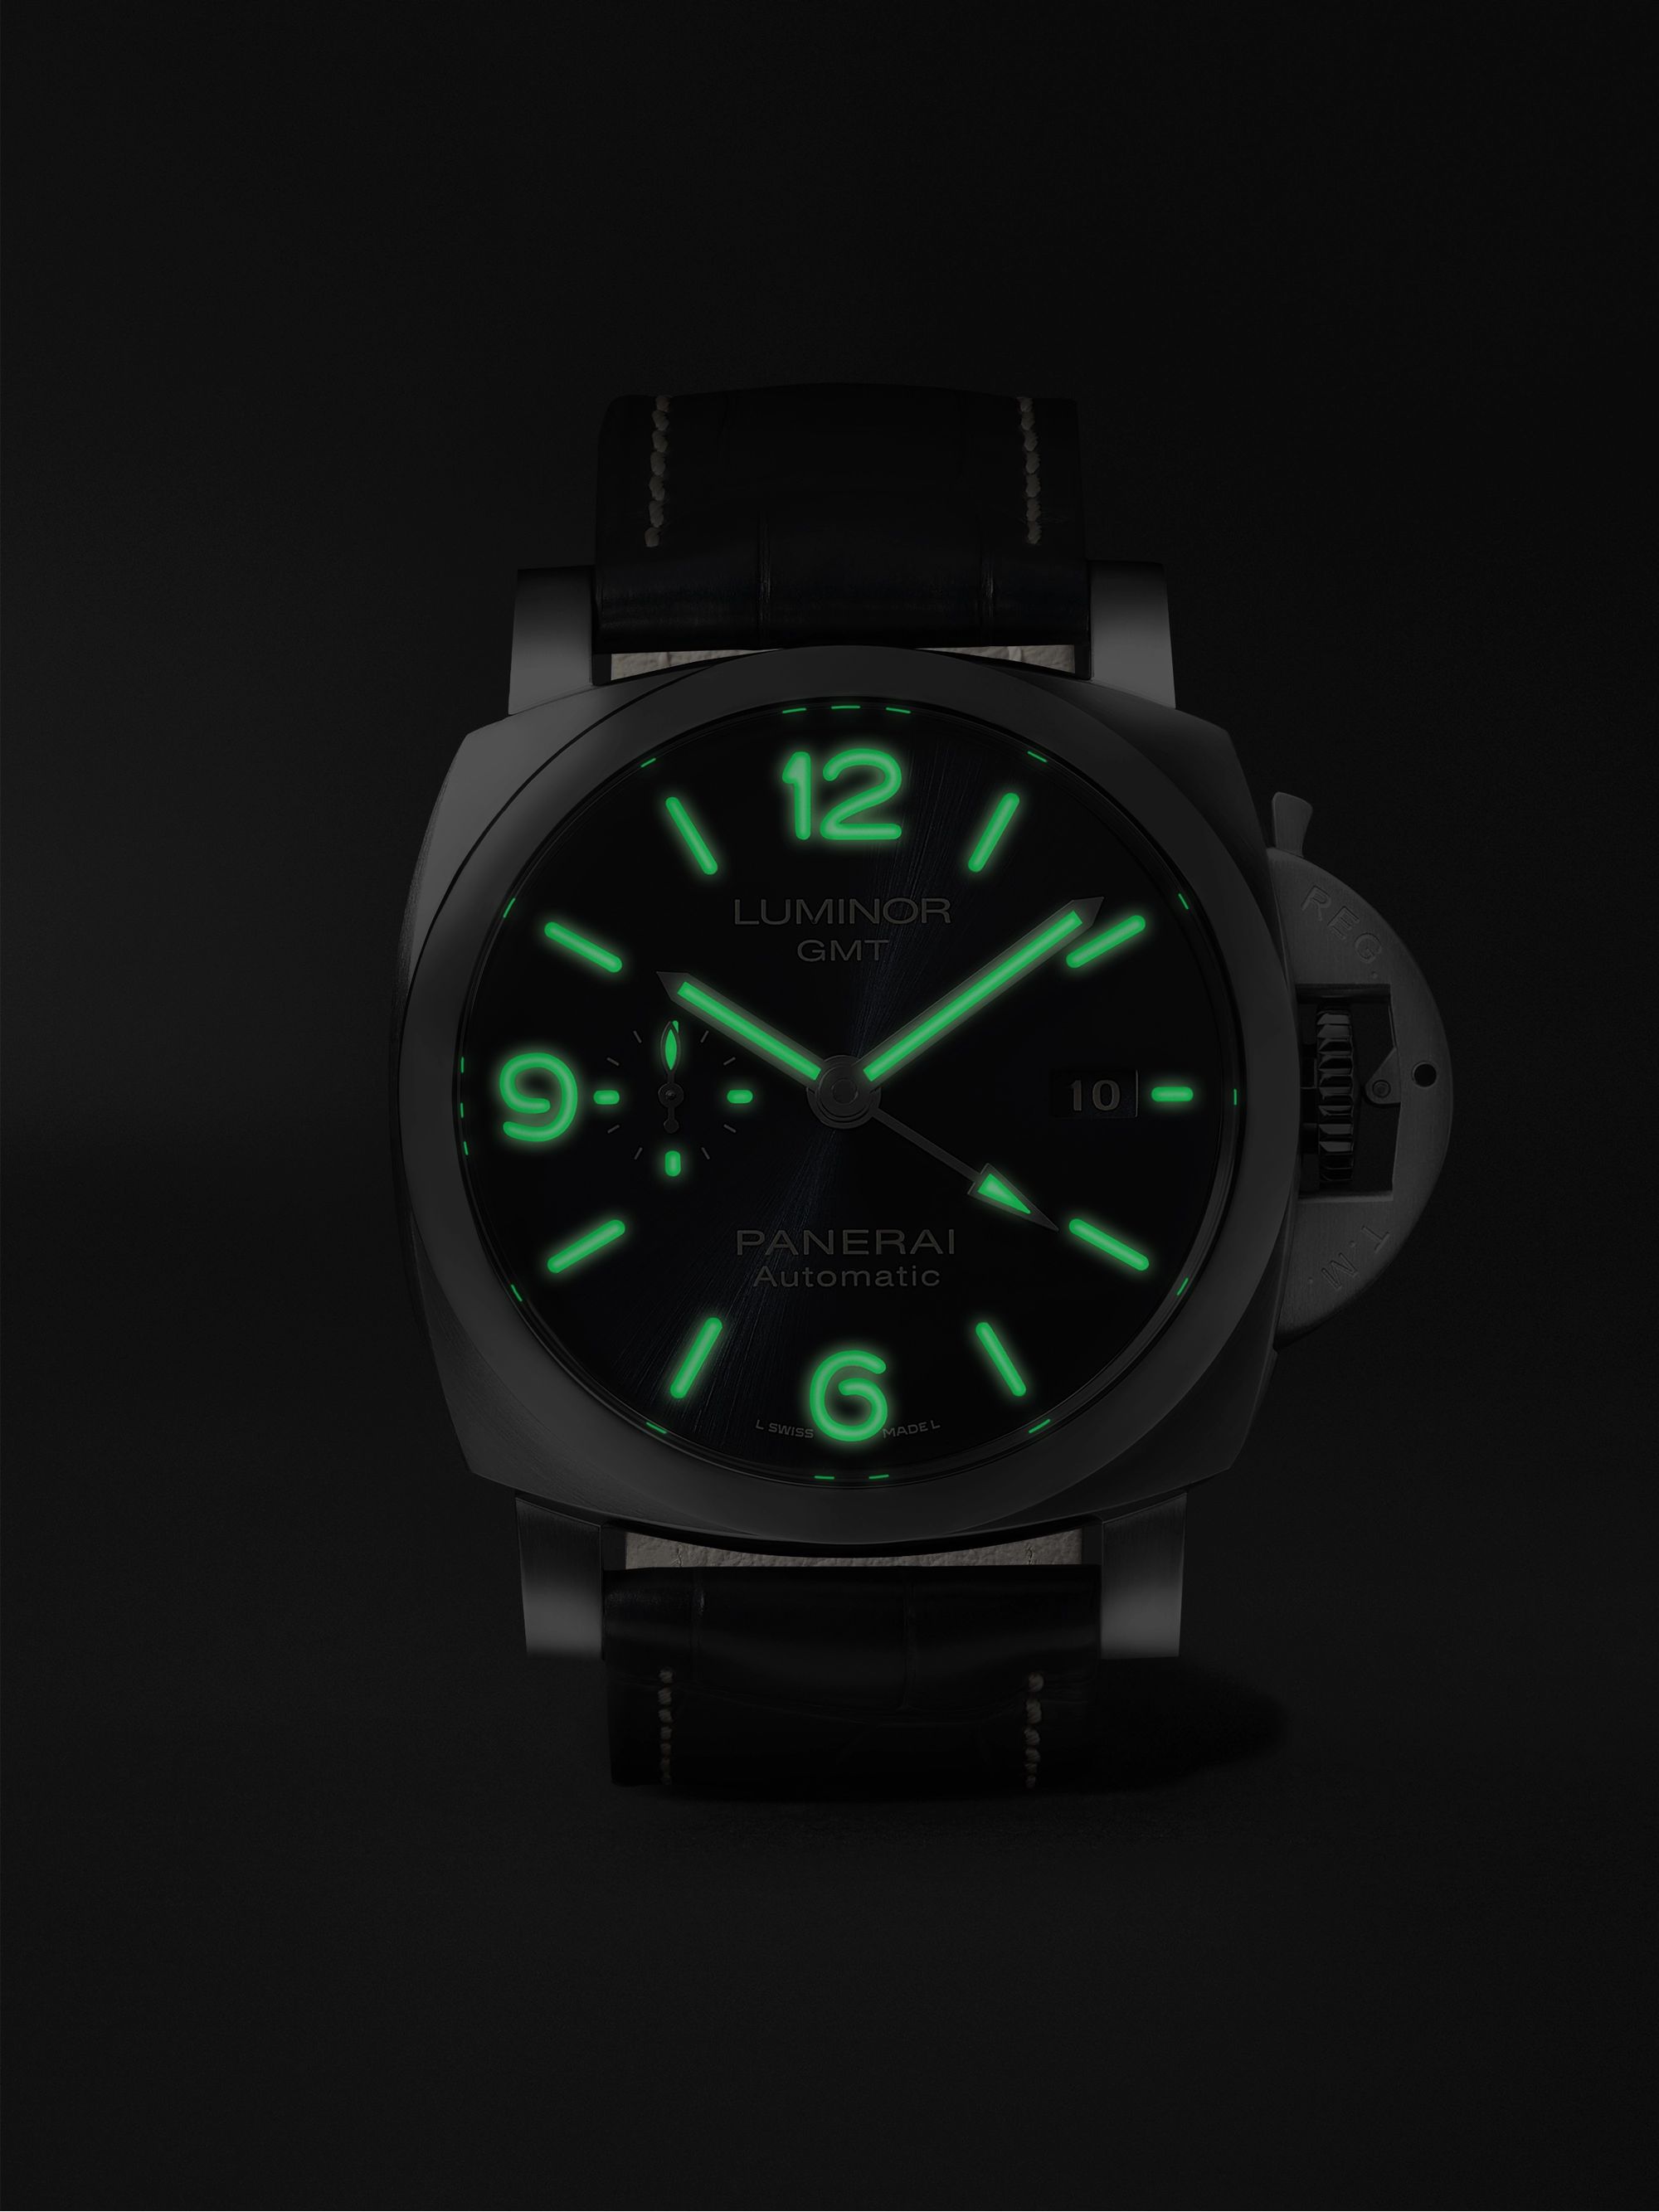 PANERAI Luminor GMT Automatic 44mm Stainless Steel and Alligator Watch, Ref. No. PAM01033